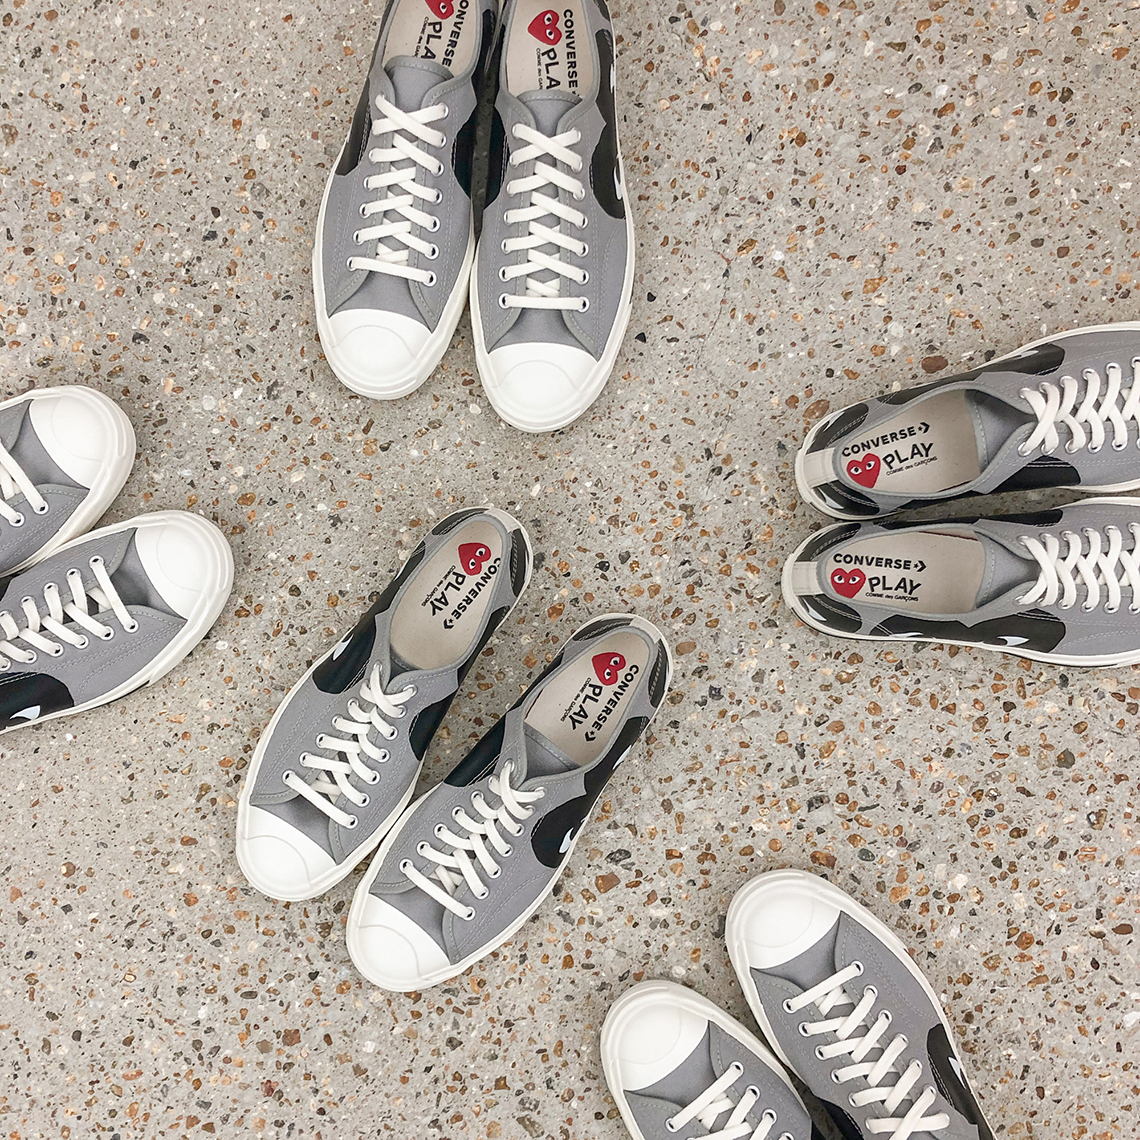 Cdg Play Converse Jack Purcell 5